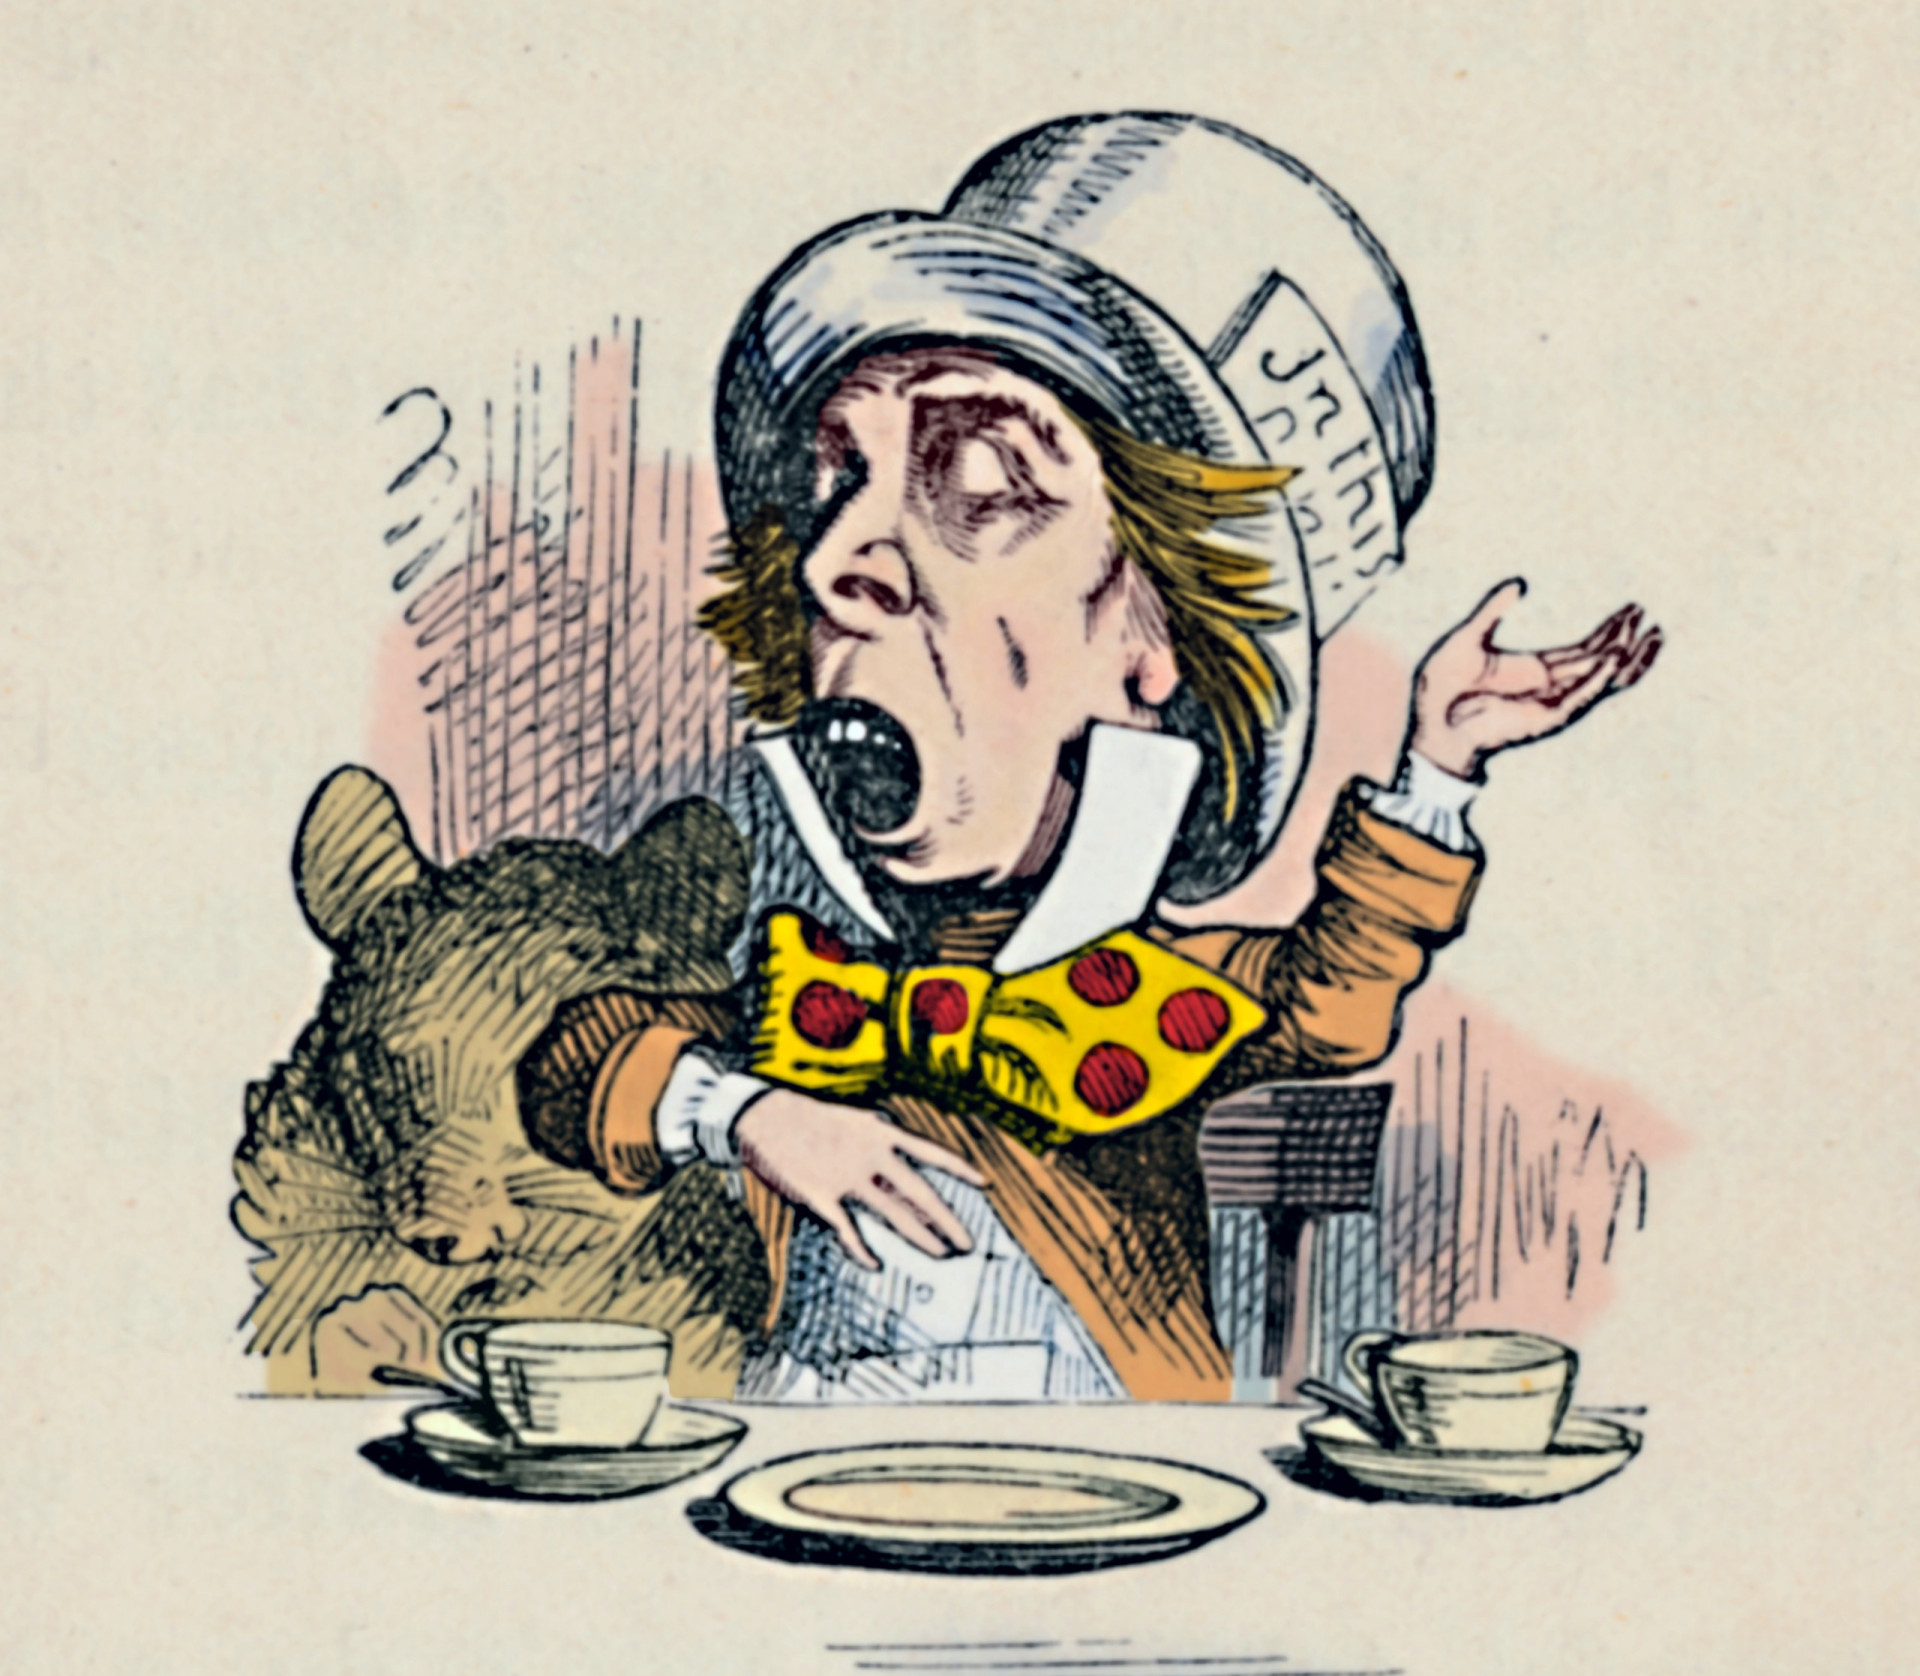 <p>The Mad Hatter is one of the story's most endearing characters, though Carroll refers to him simply as "the Hatter." The expression "mad as a hatter" is based on the real-life practices of hatters beginning in the 17th century. The process used to make their hats involved working with mercury, a poison that can induce neurological and behavioral disorders.</p><p><a href="https://www.msn.com/en-us/community/channel/vid-7xx8mnucu55yw63we9va2gwr7uihbxwc68fxqp25x6tg4ftibpra?cvid=94631541bc0f4f89bfd59158d696ad7e">Follow us and access great exclusive content every day</a></p>